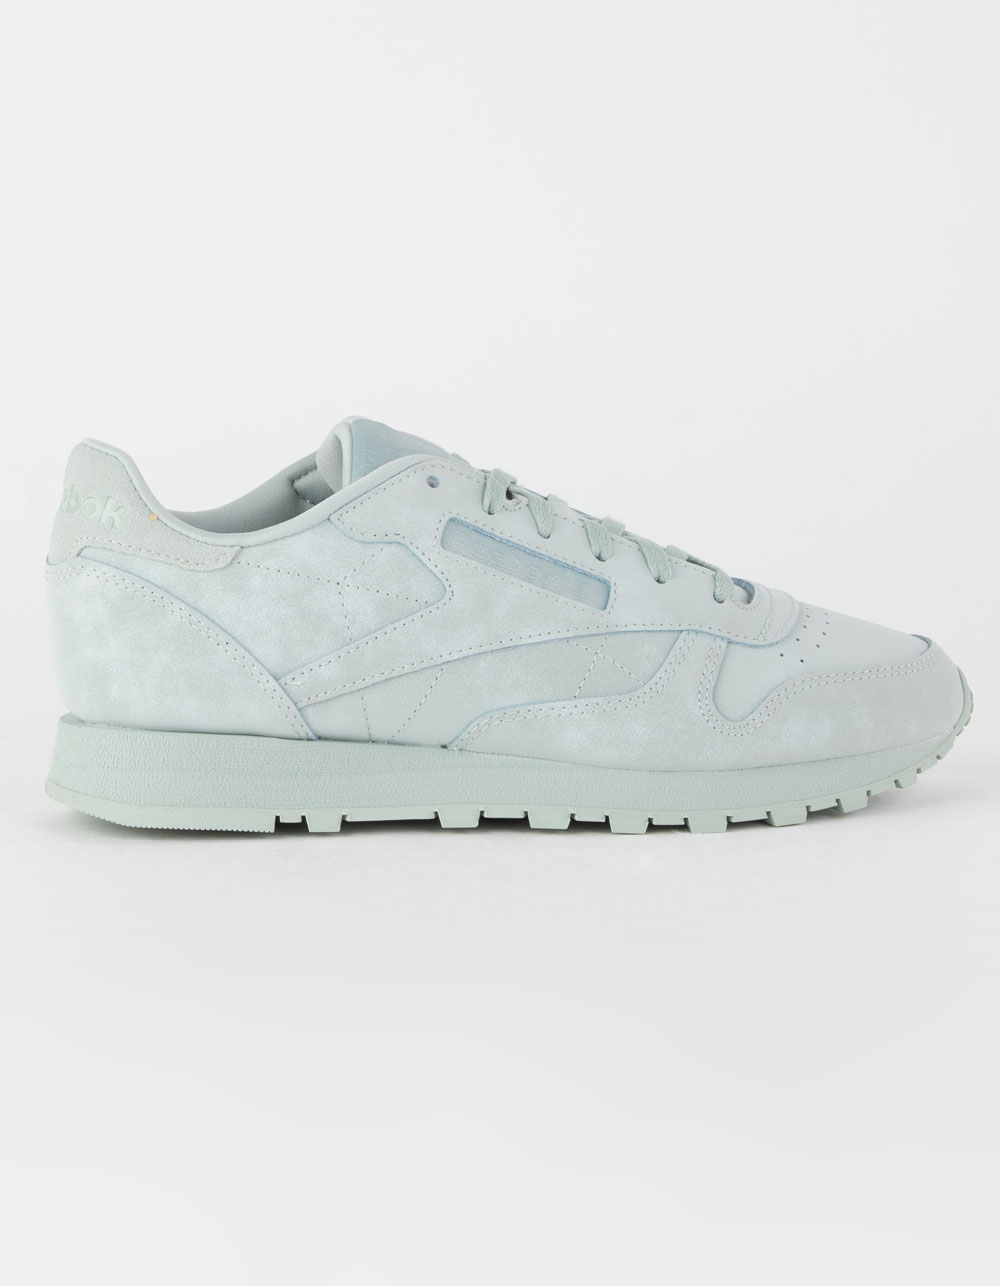 offset spoel cruise REEBOK Classic Leather Vintage Pastel Womens Shoes - LT GREEN | Tillys